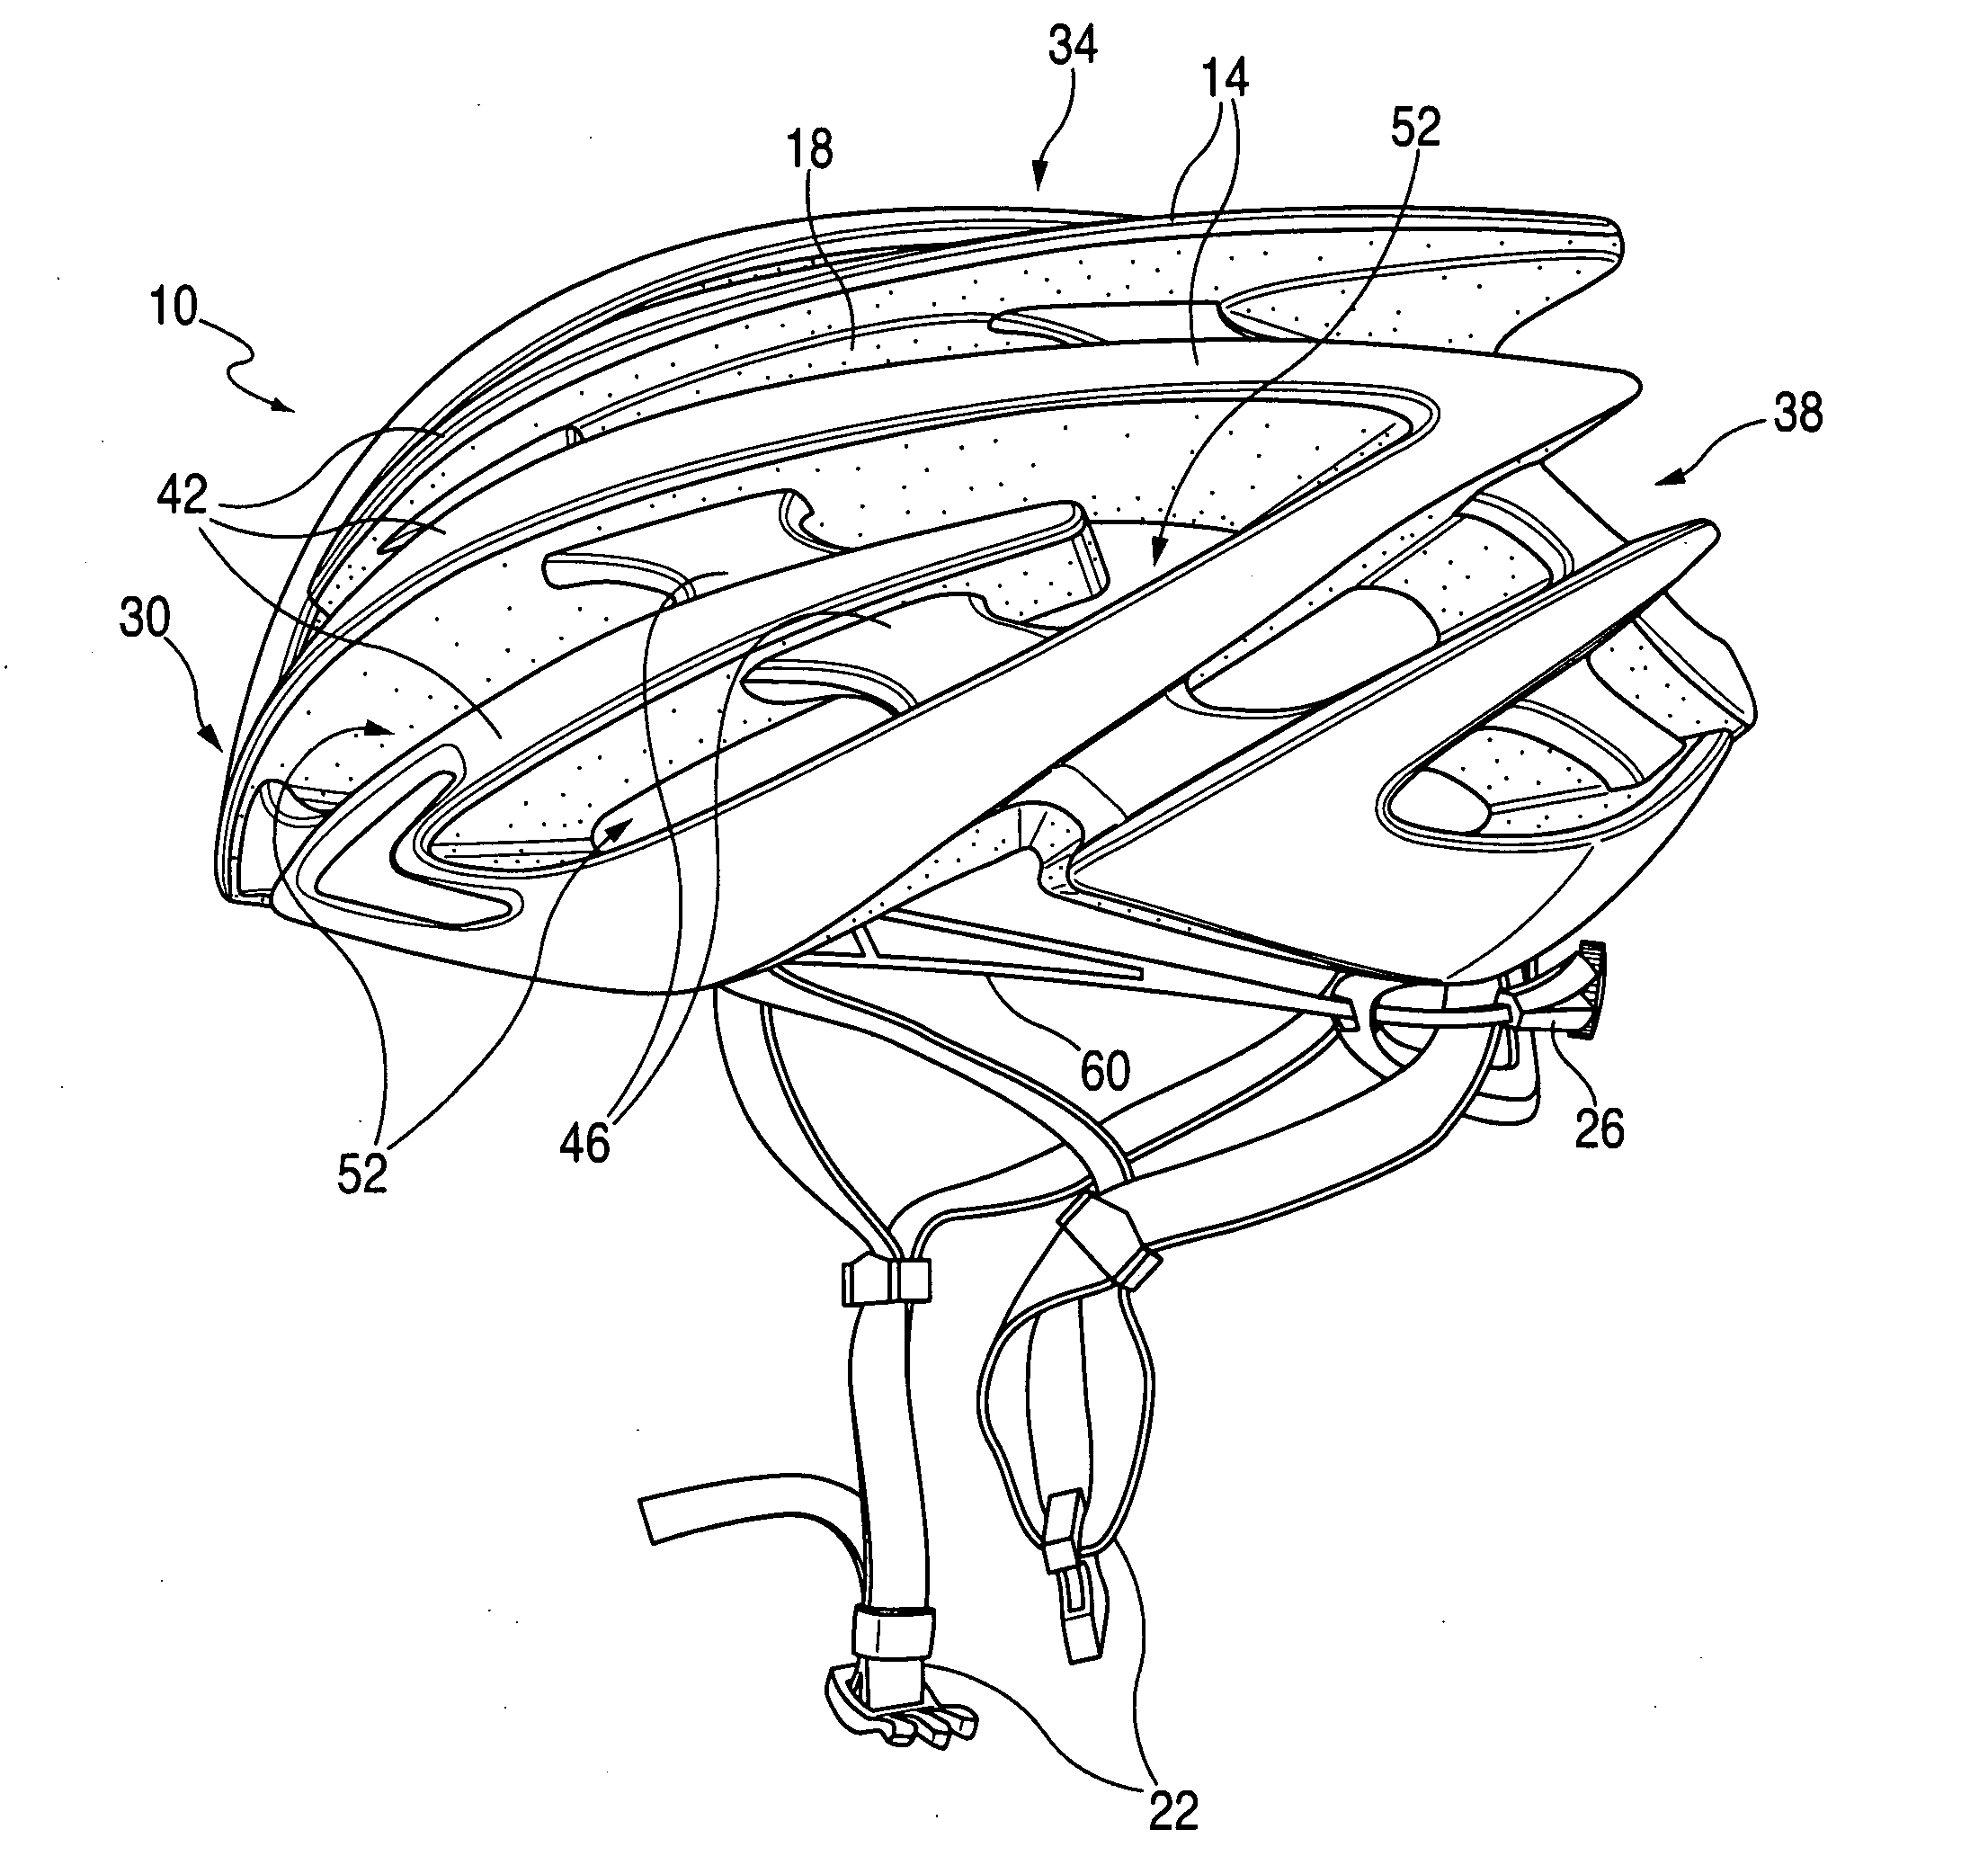 Protective bicycle helmet with internal ventilation system